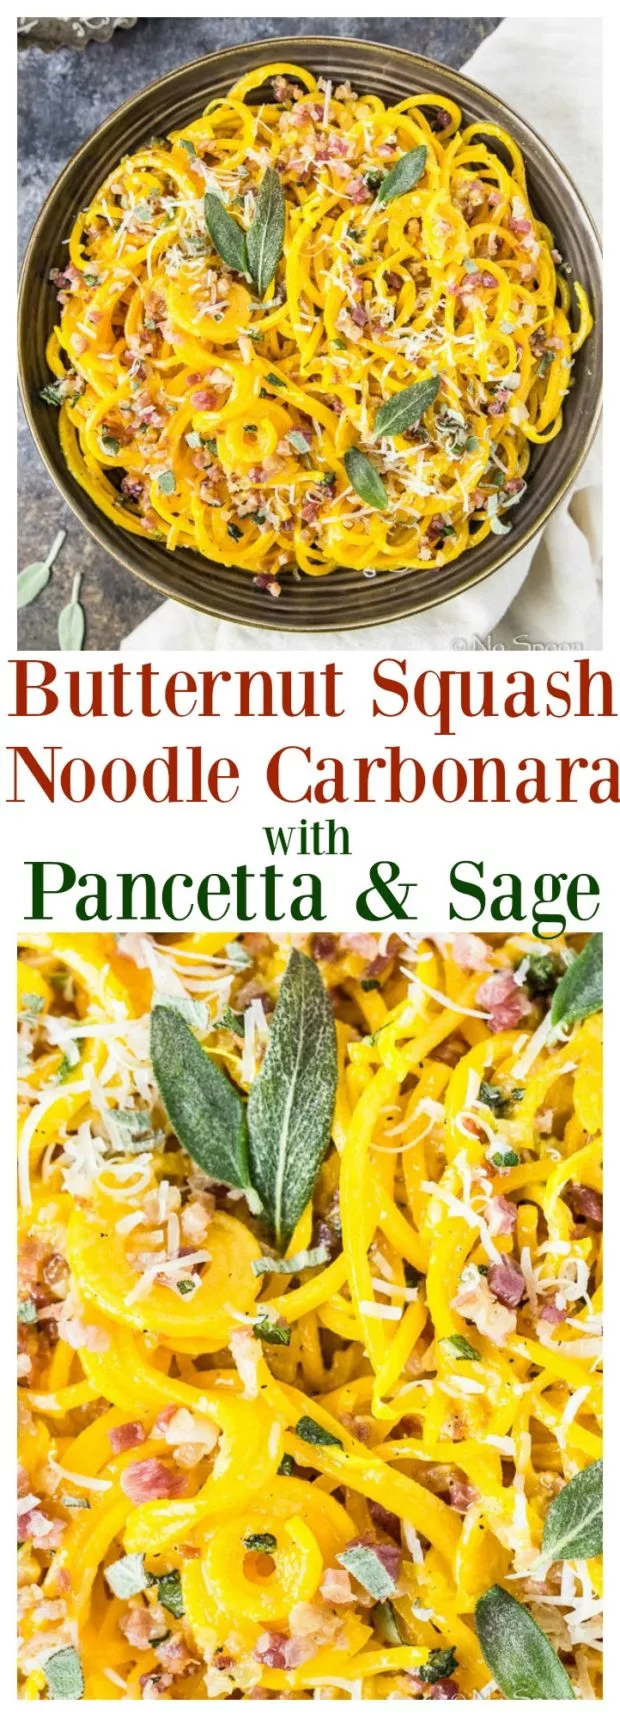 Butternut Squash Noodle Carbonara with Pancetta and Sage